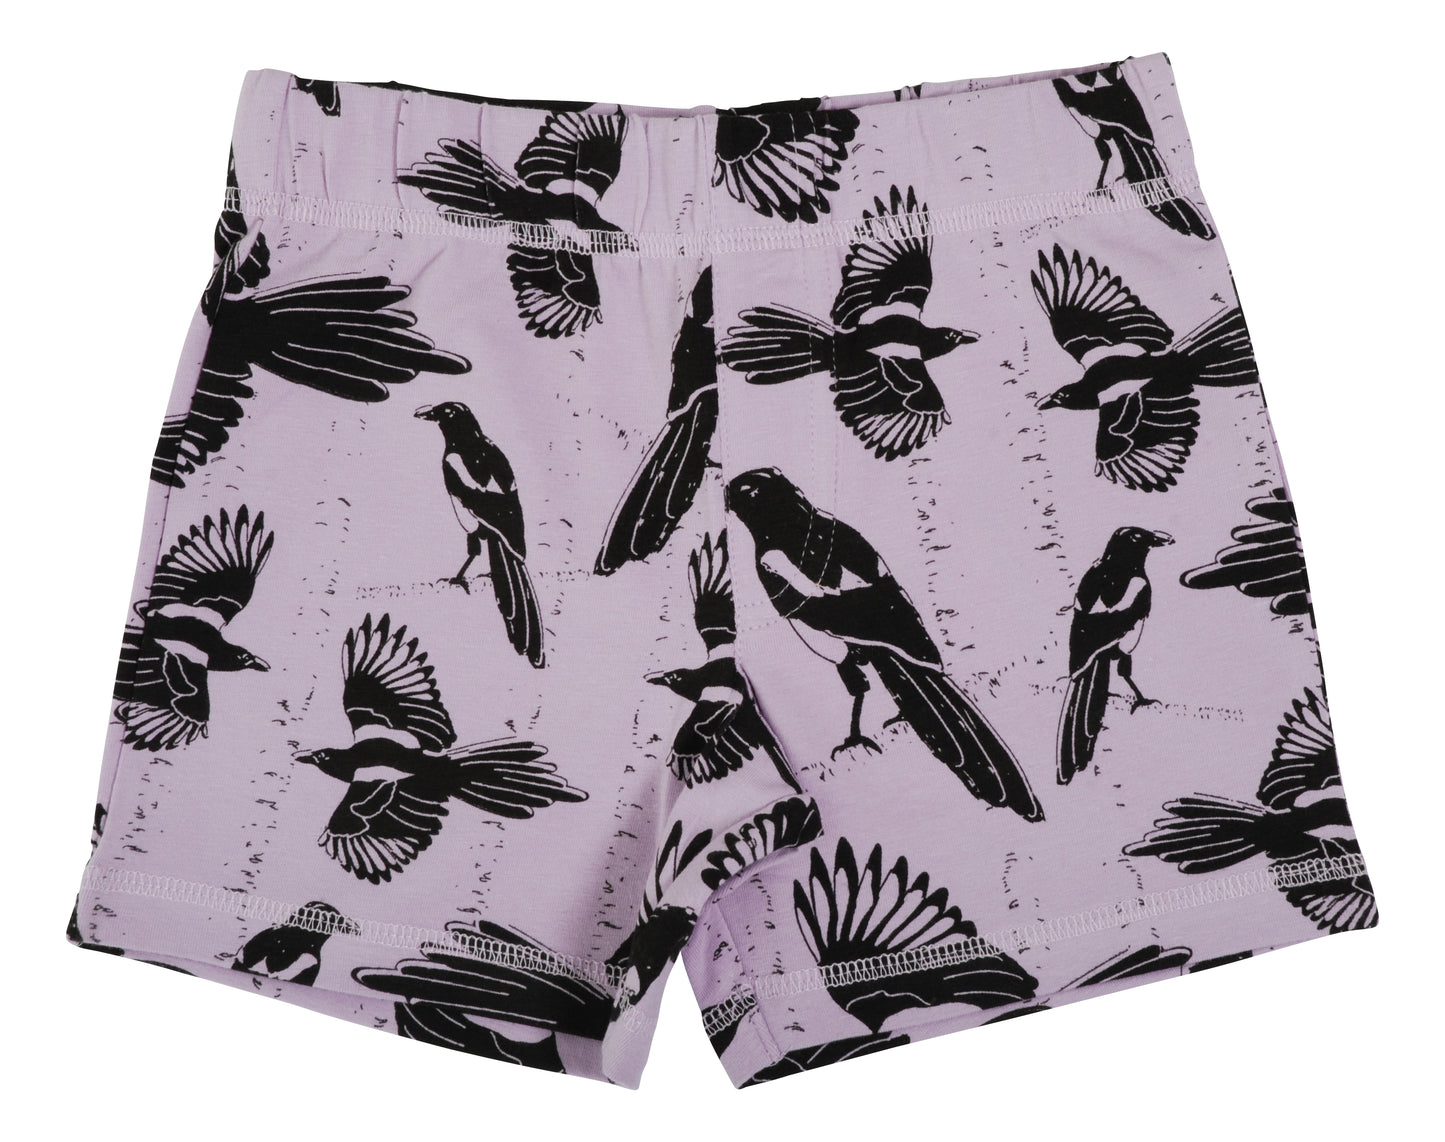 More Than A Fling- Short Pants- Pica Pica Orchid Bloom